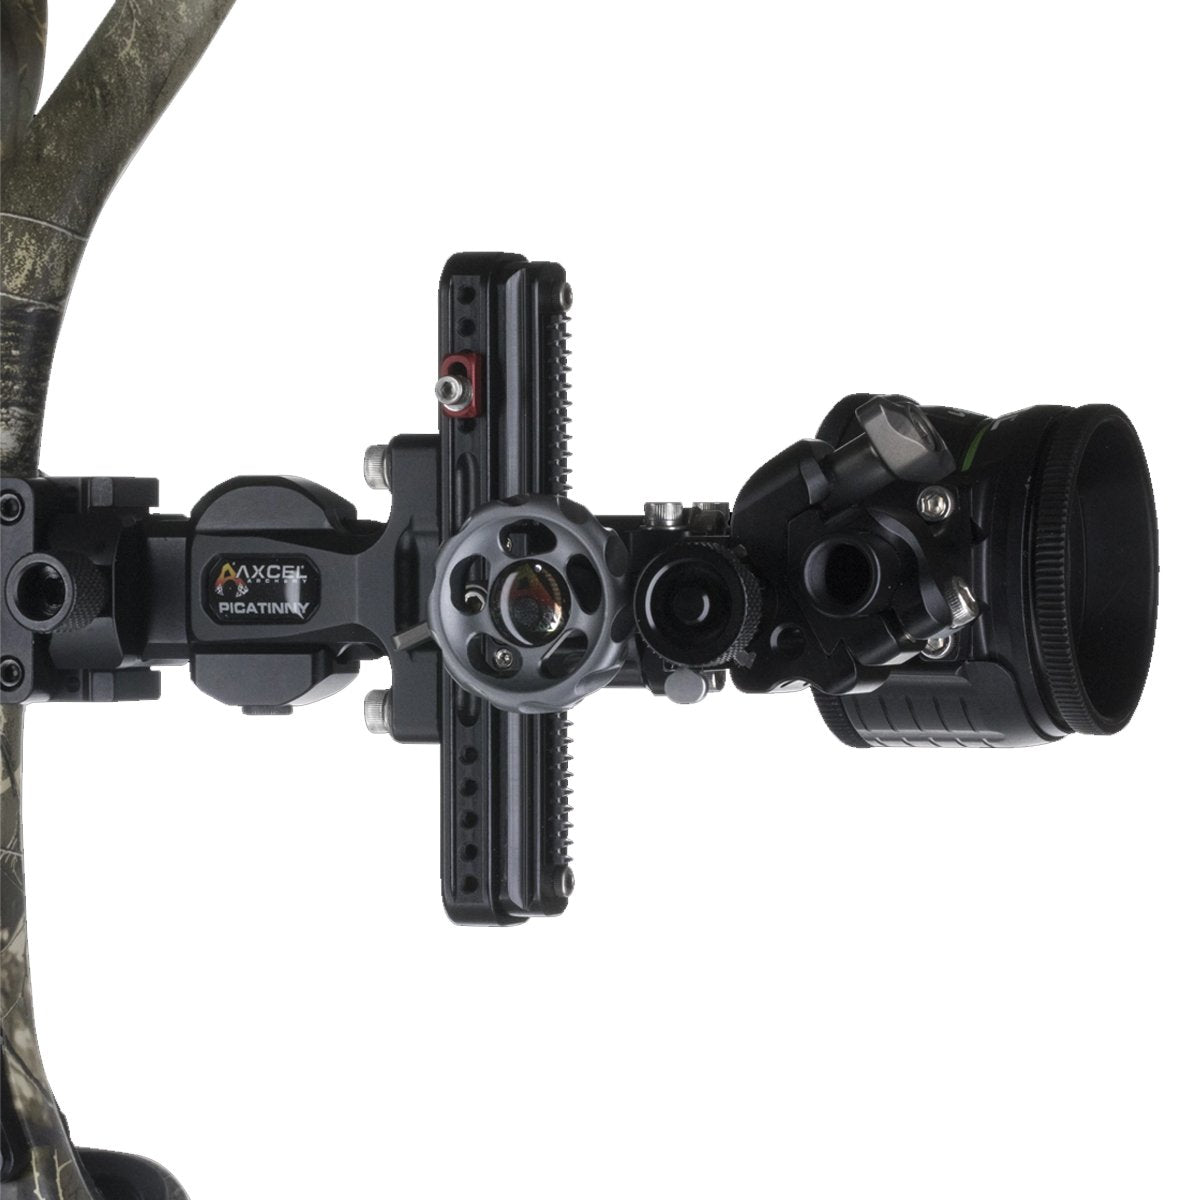 Axcel Landslyde Slider Picatinny Accustat II 5 Pin Bow Sight in  by GOHUNT | Axcel - GOHUNT Shop